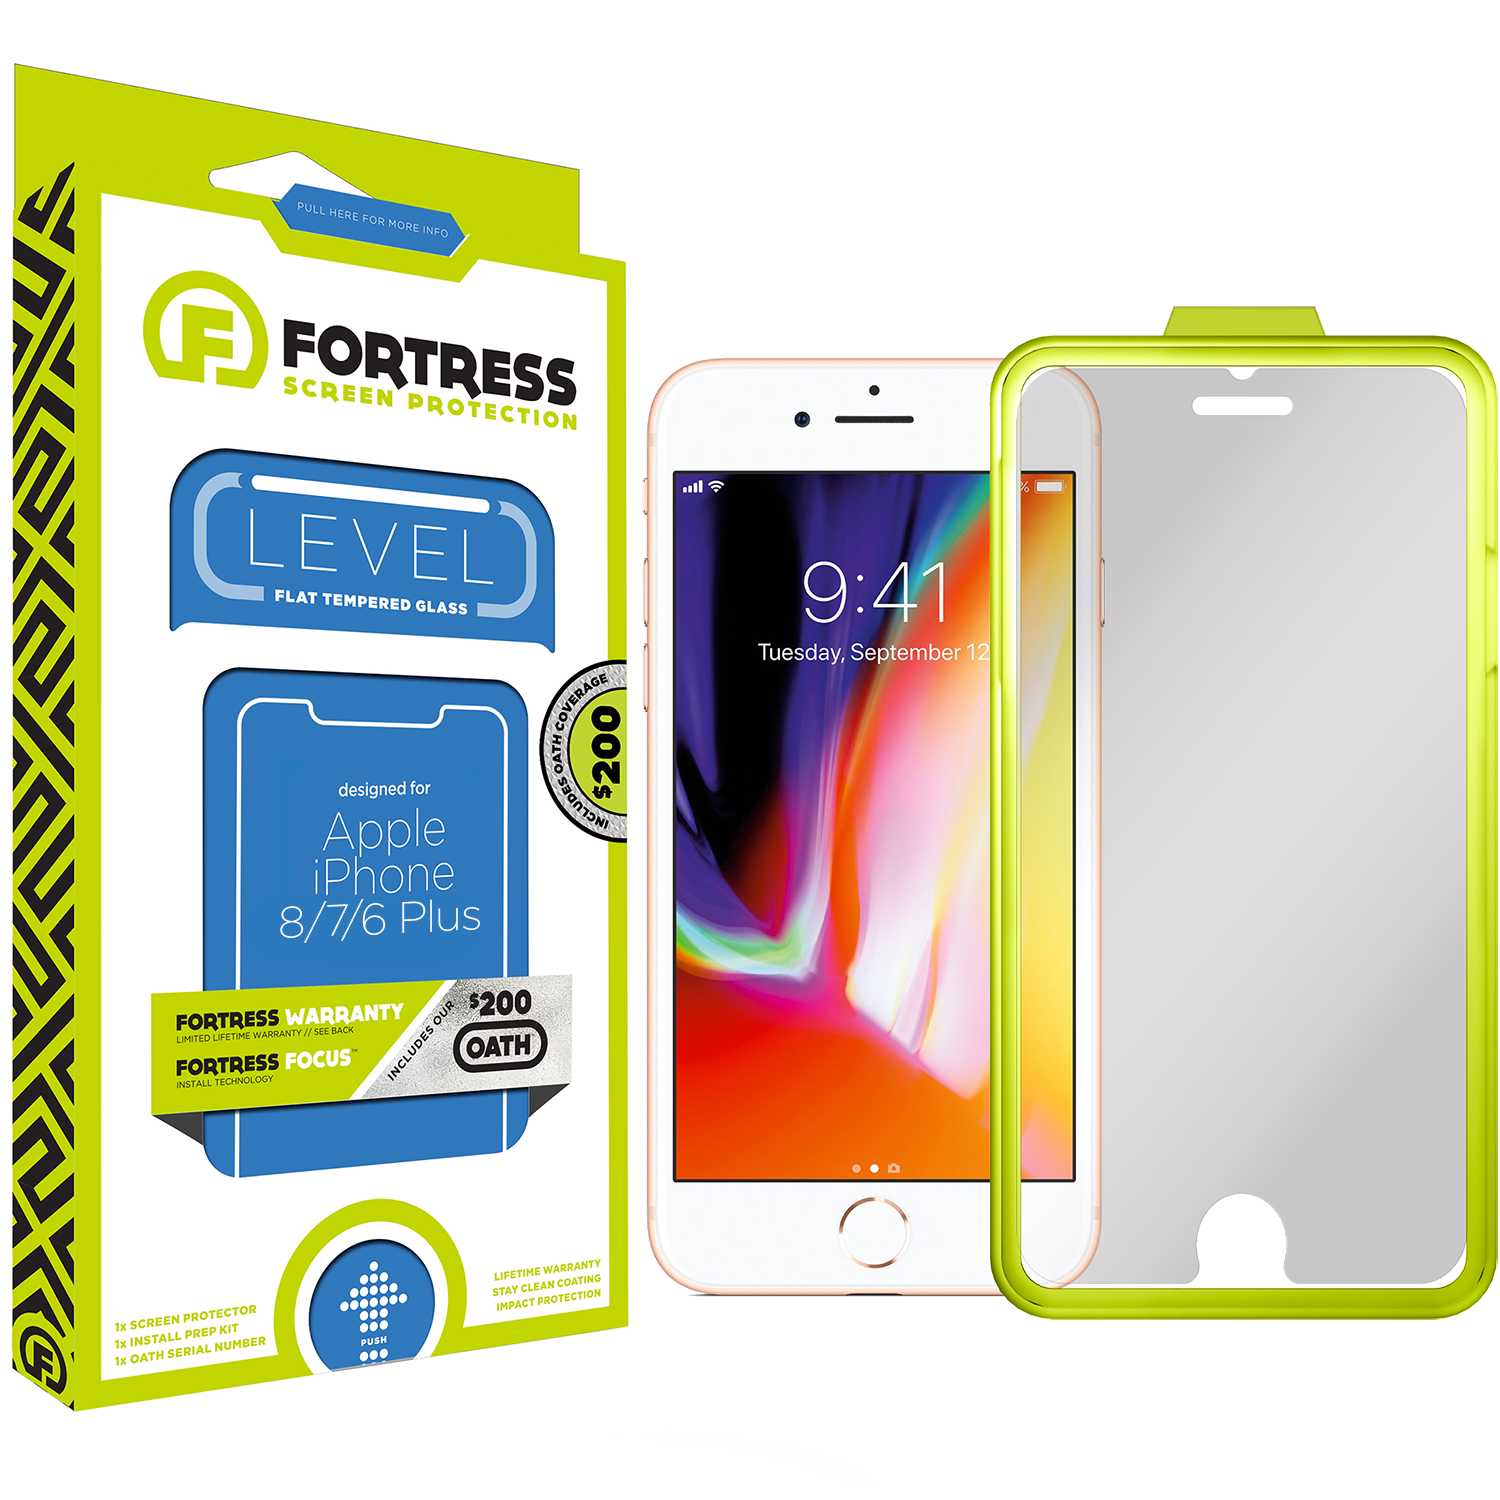 Fortress iPhone 8/7 Plus Screen Protector $200CoverageInstallTool Scooch Screen Protector